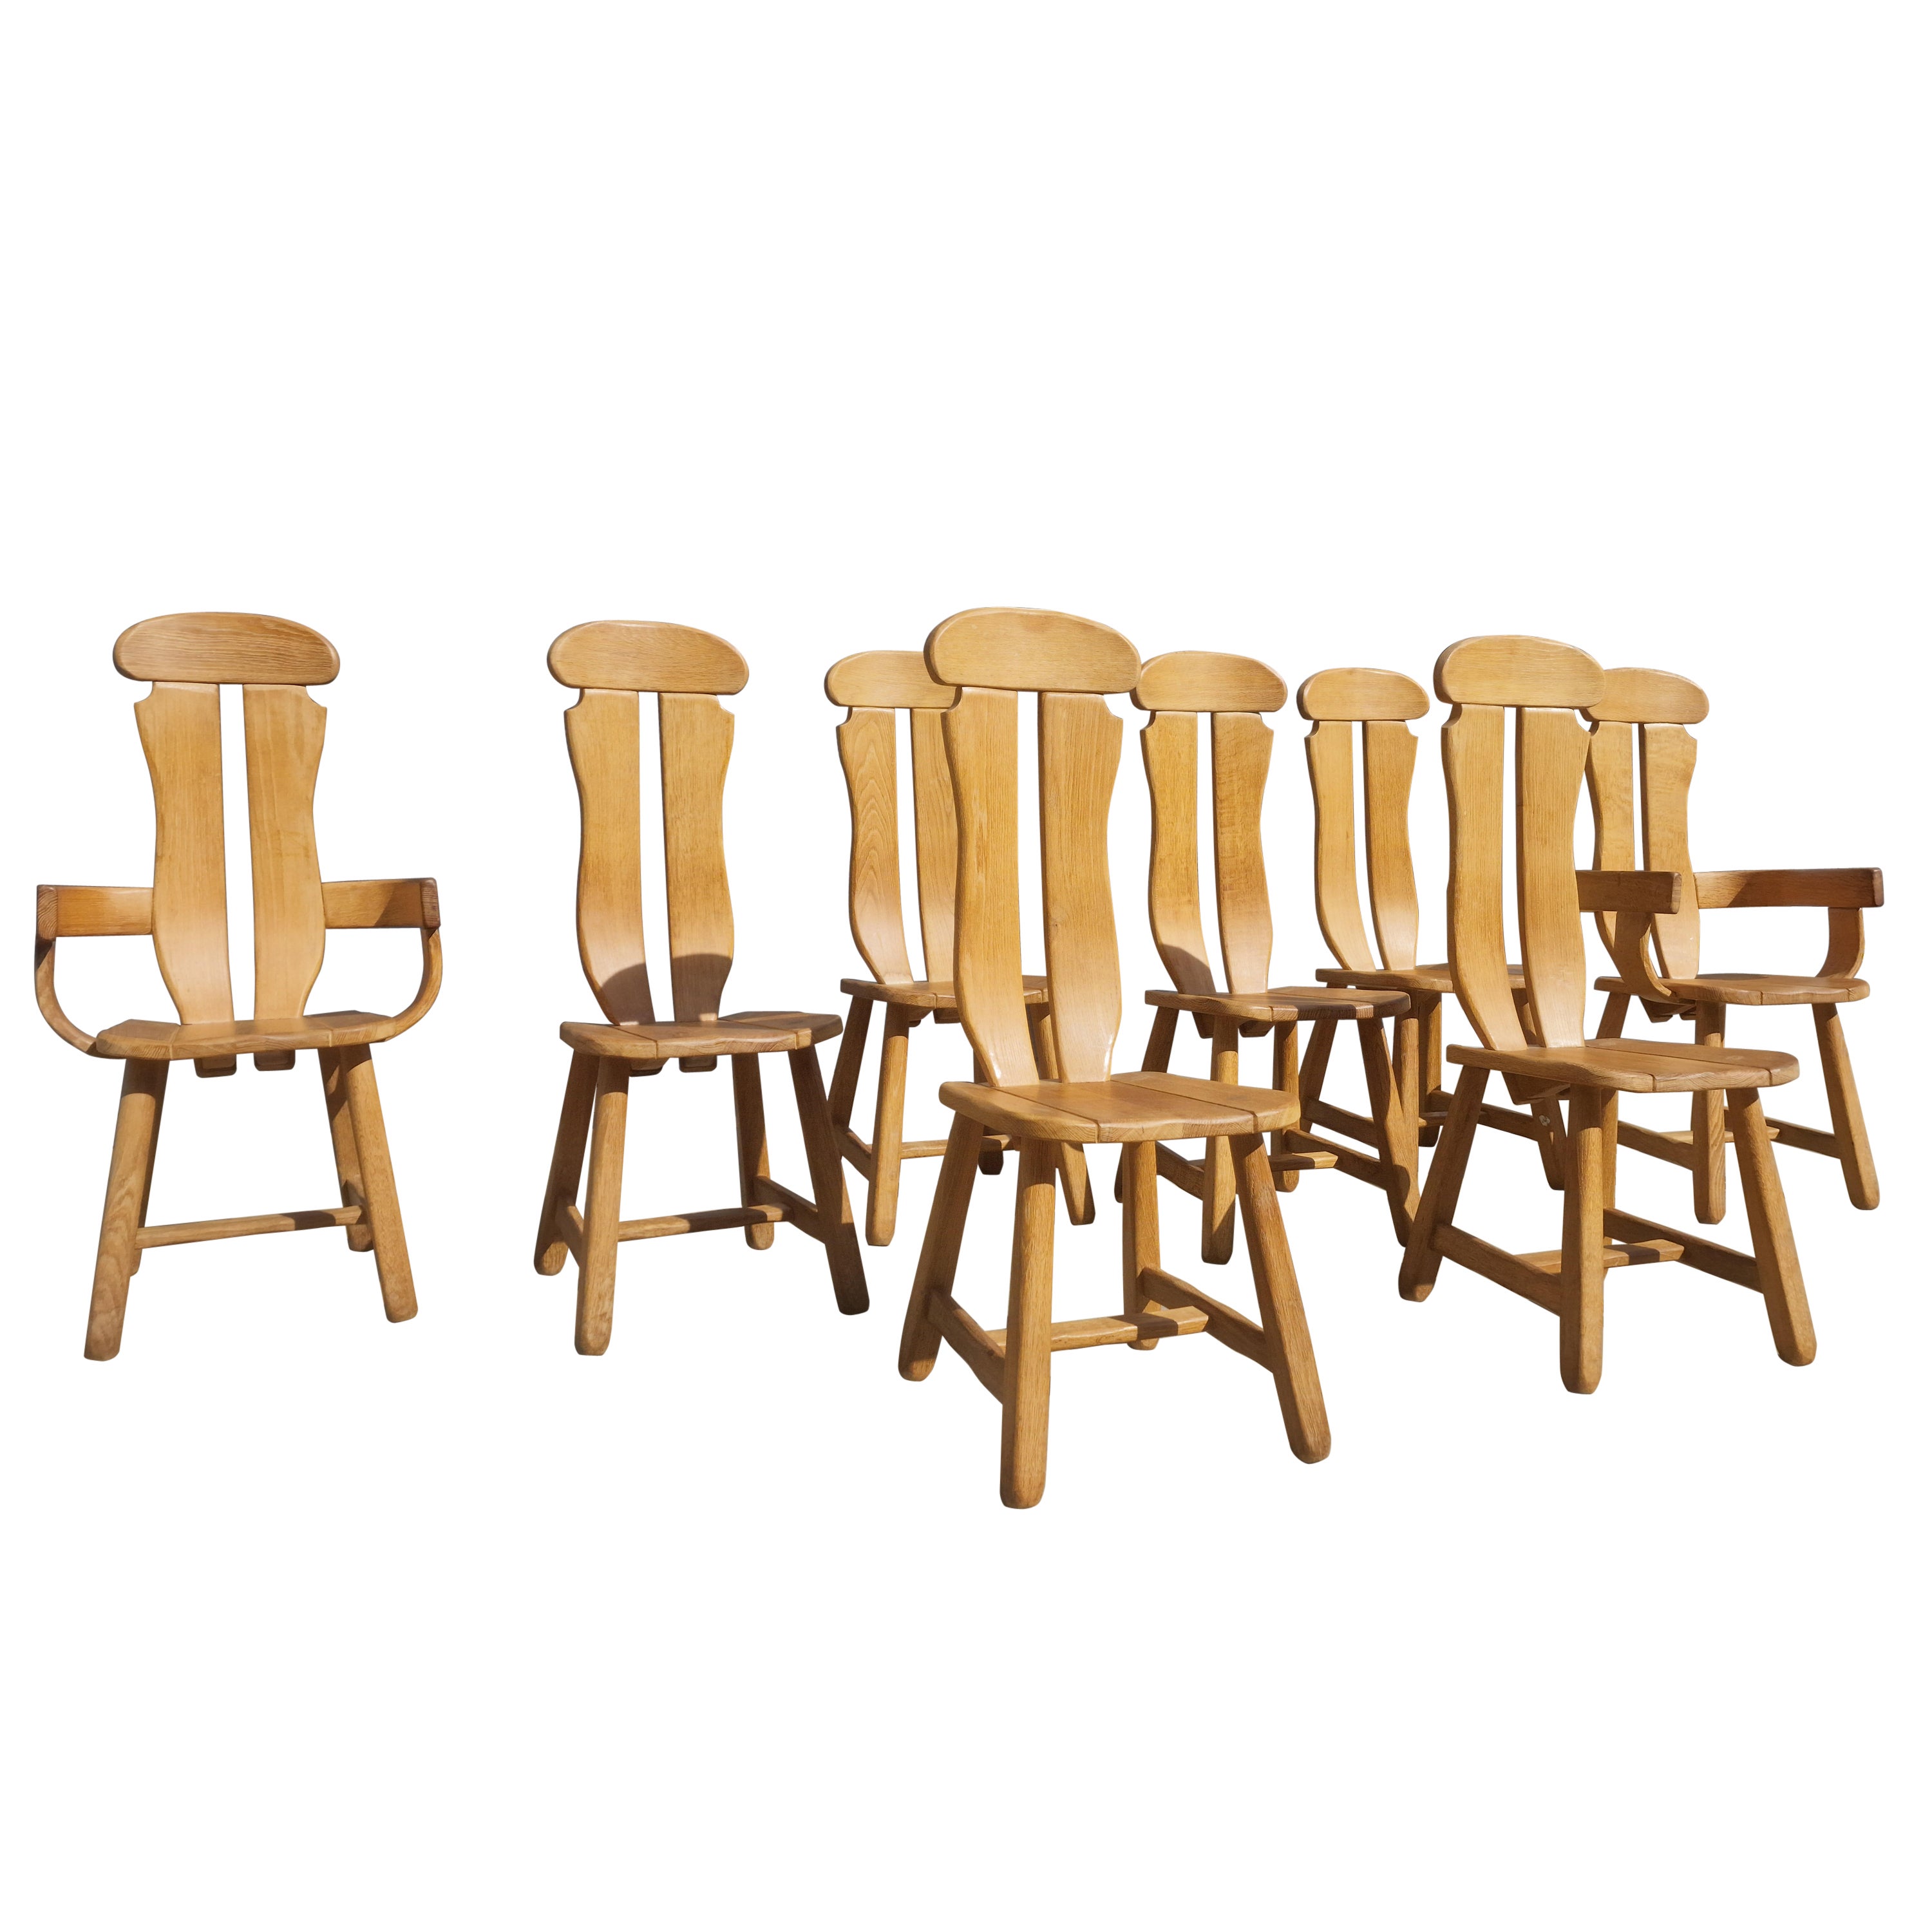 Set of 8 Brutalist Oak Chairs from De Puydt, Belgium 1970s For Sale